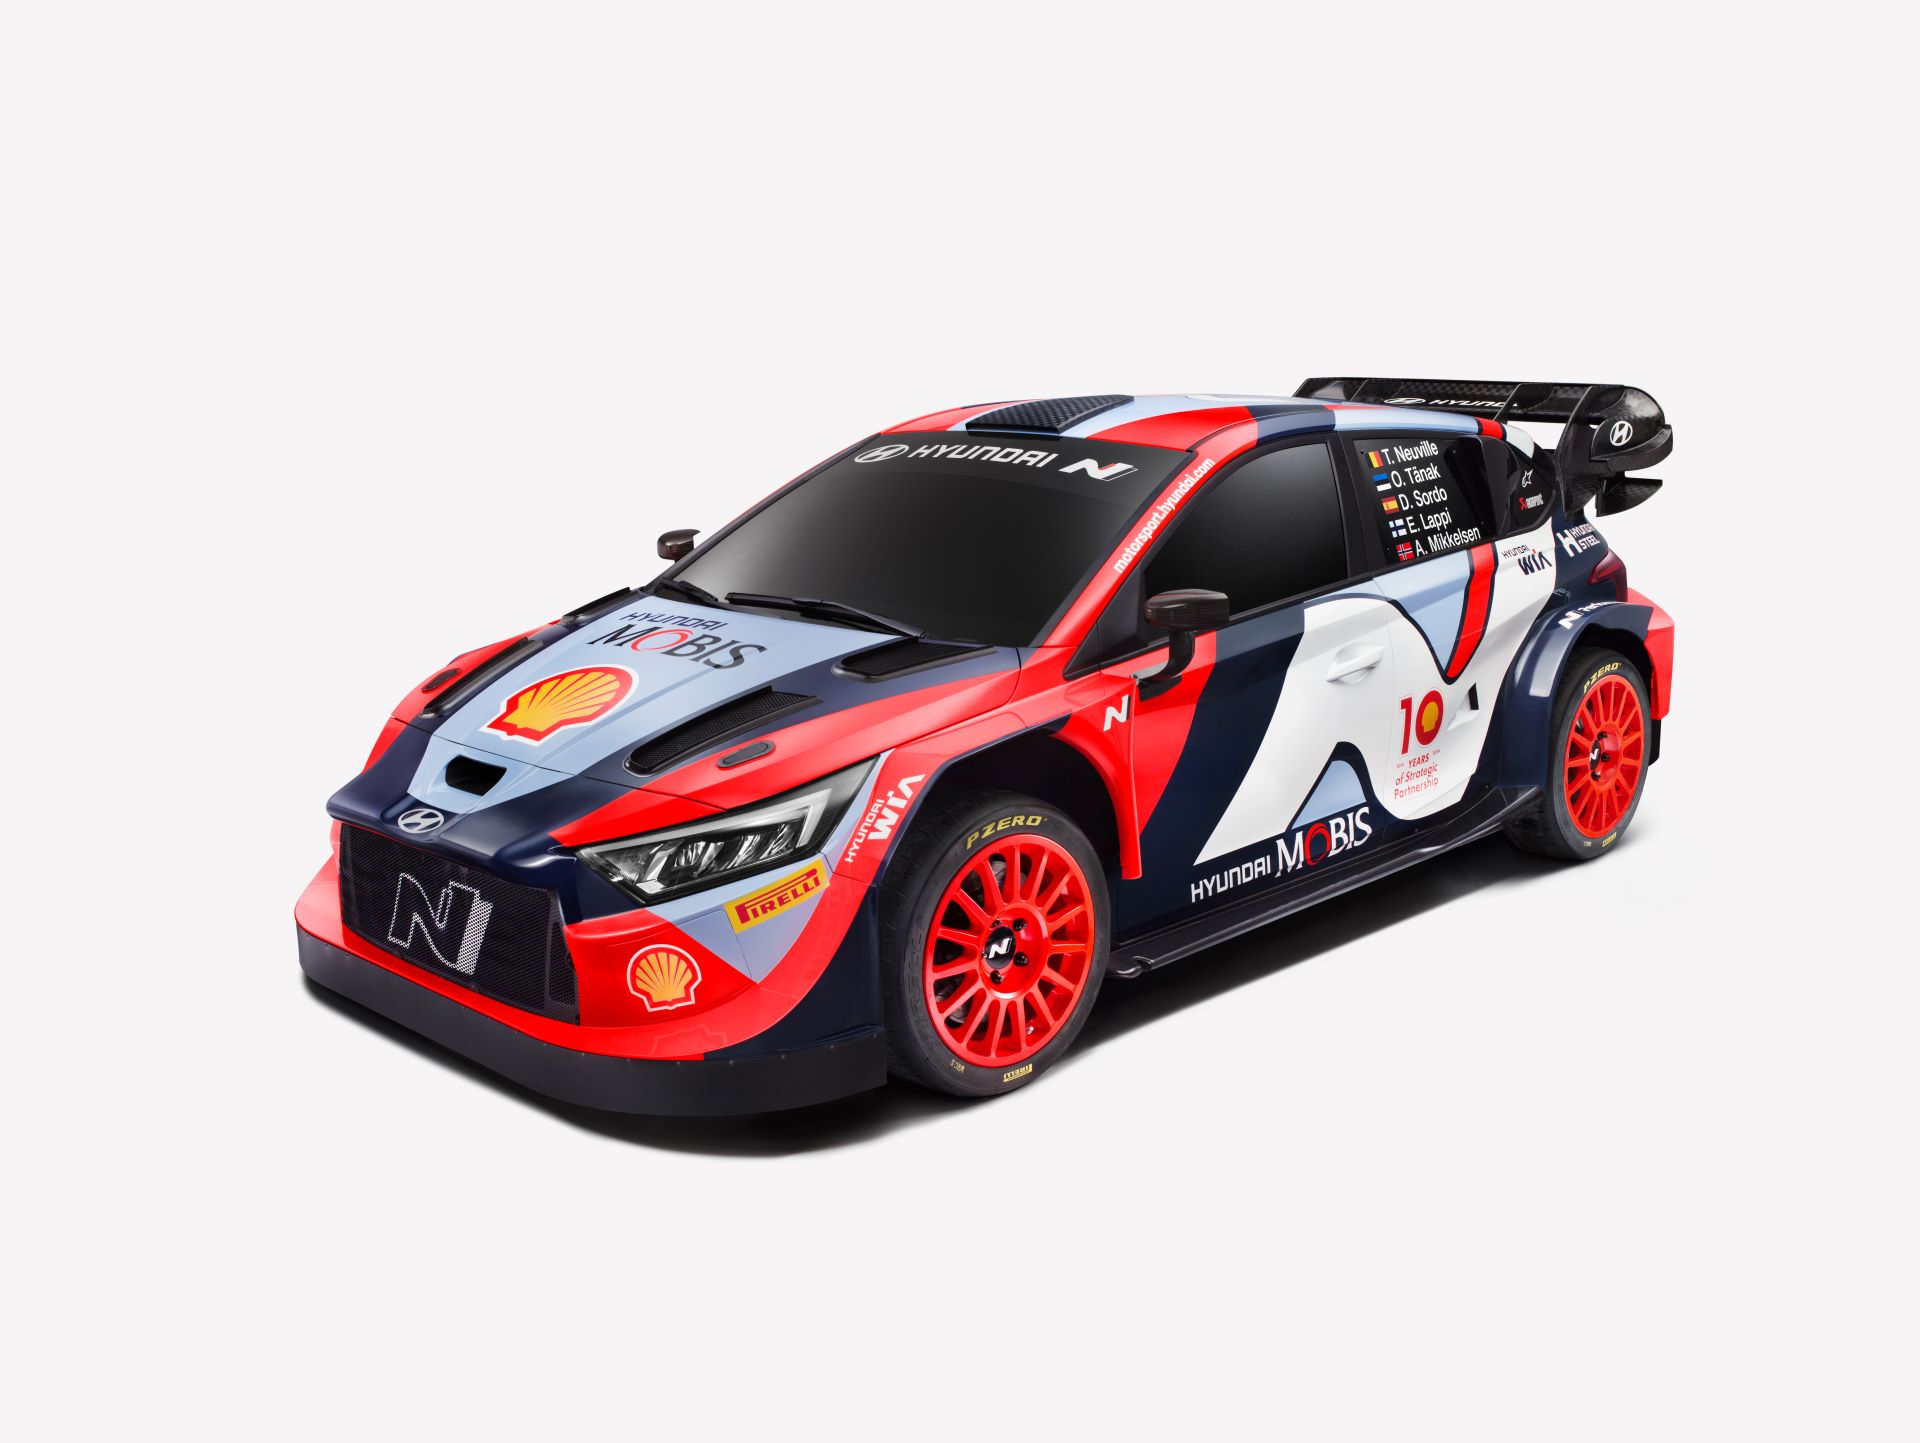 Hyundai Motorsport tackles Rally Sweden with new car livery, celebrating 10 years in WRC